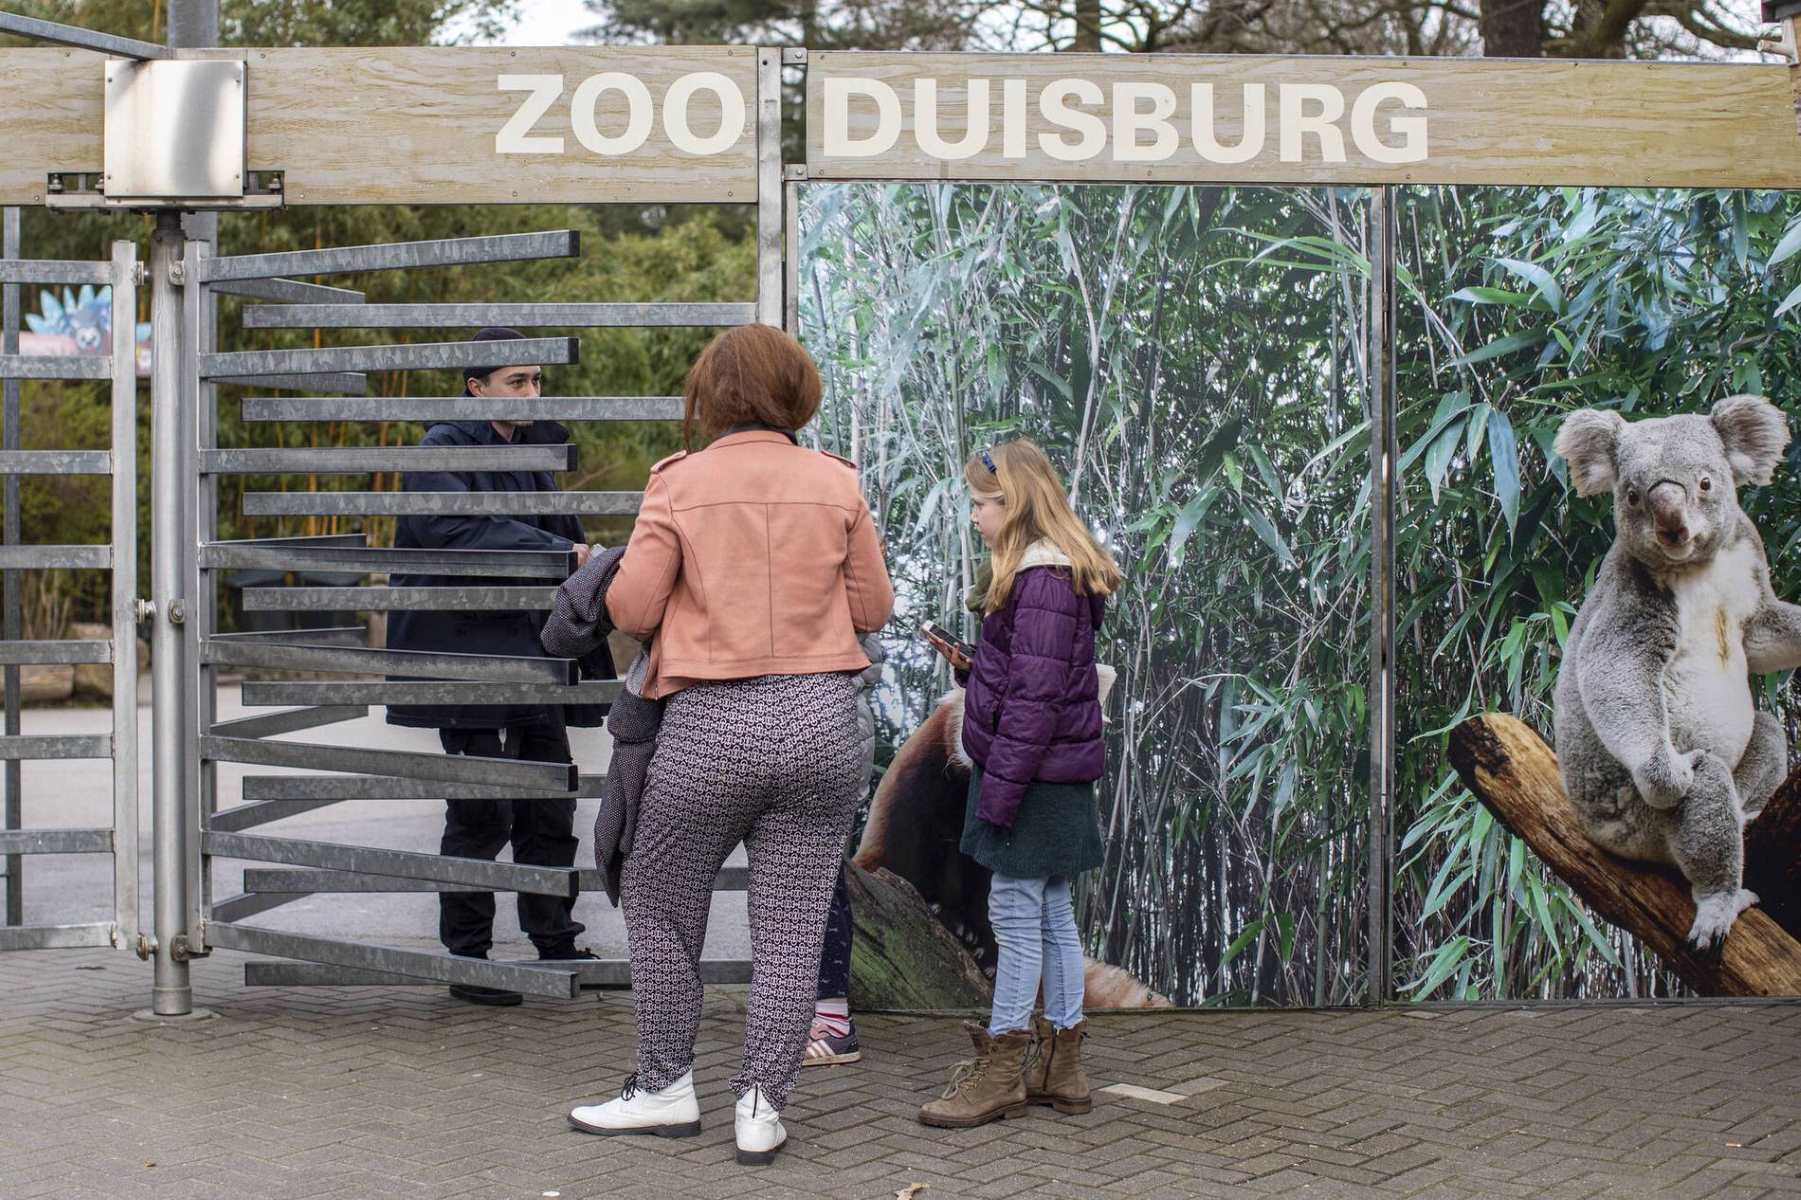 17-extraordinary-facts-about-duisburg-zoo